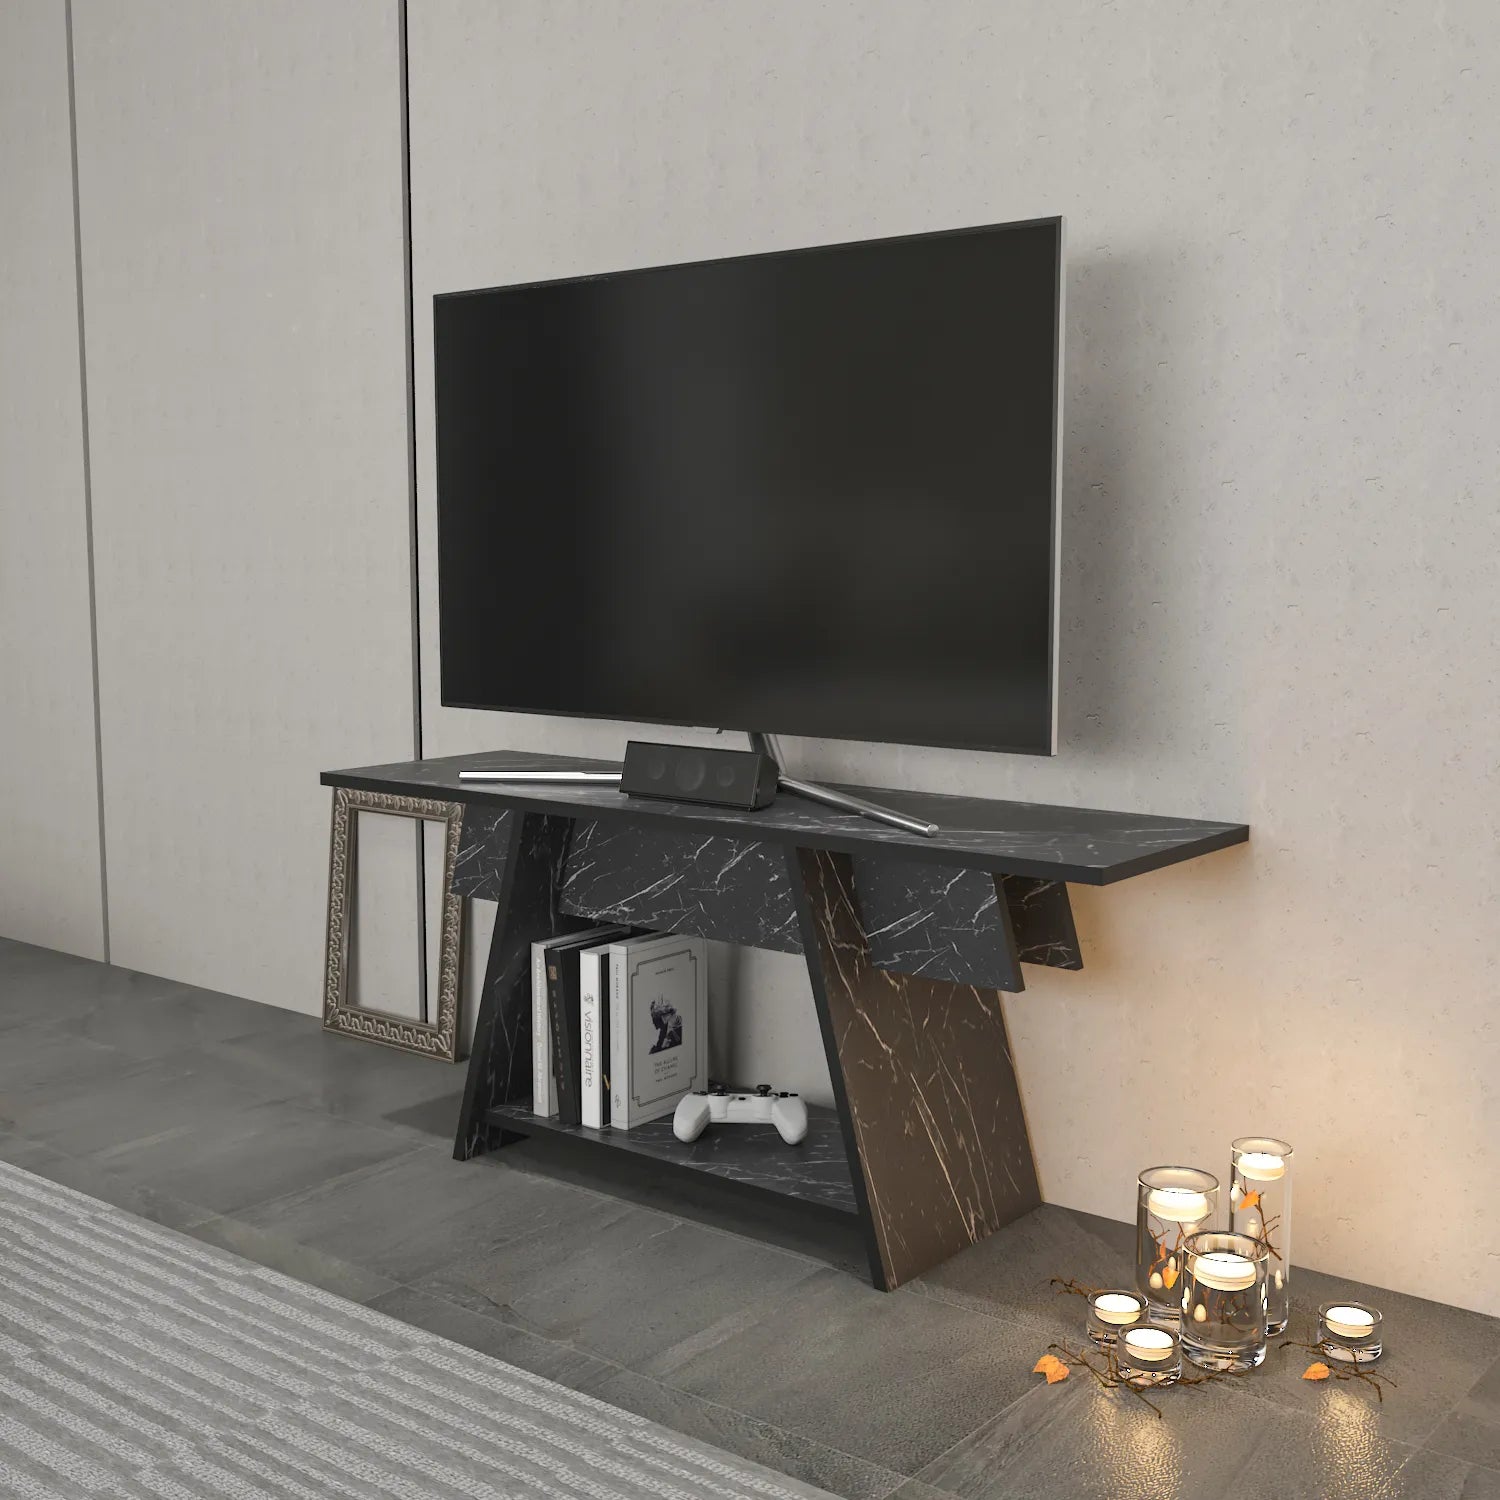 Lanca 47" Wide Minimalist TV Stand Media Console | Streamlined Design for TVs up to 55"